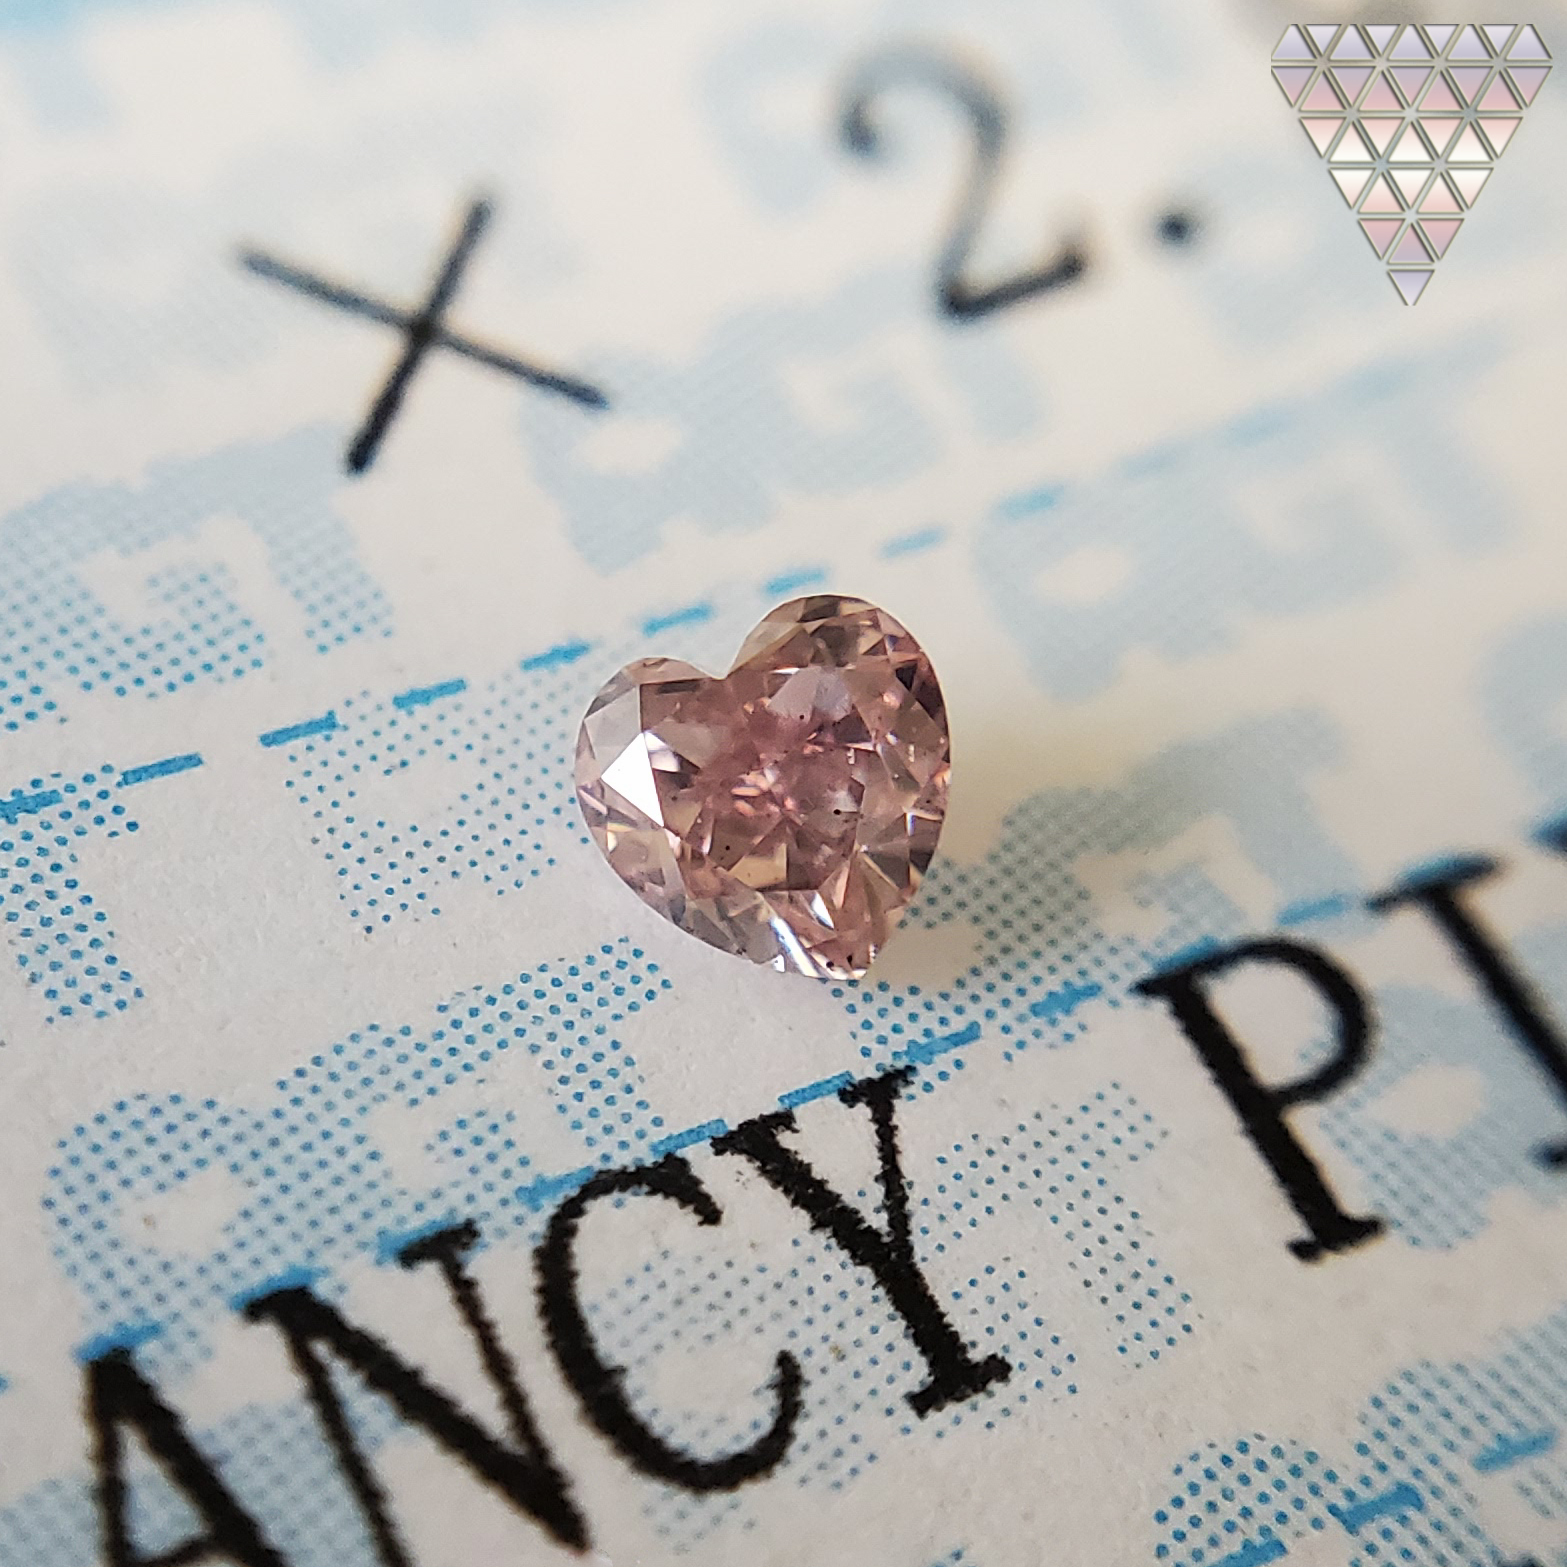 0.093 Ct Fancy Pink Si1 Heart AGT Japan Natural Loose Diamond Exchange Federation 7